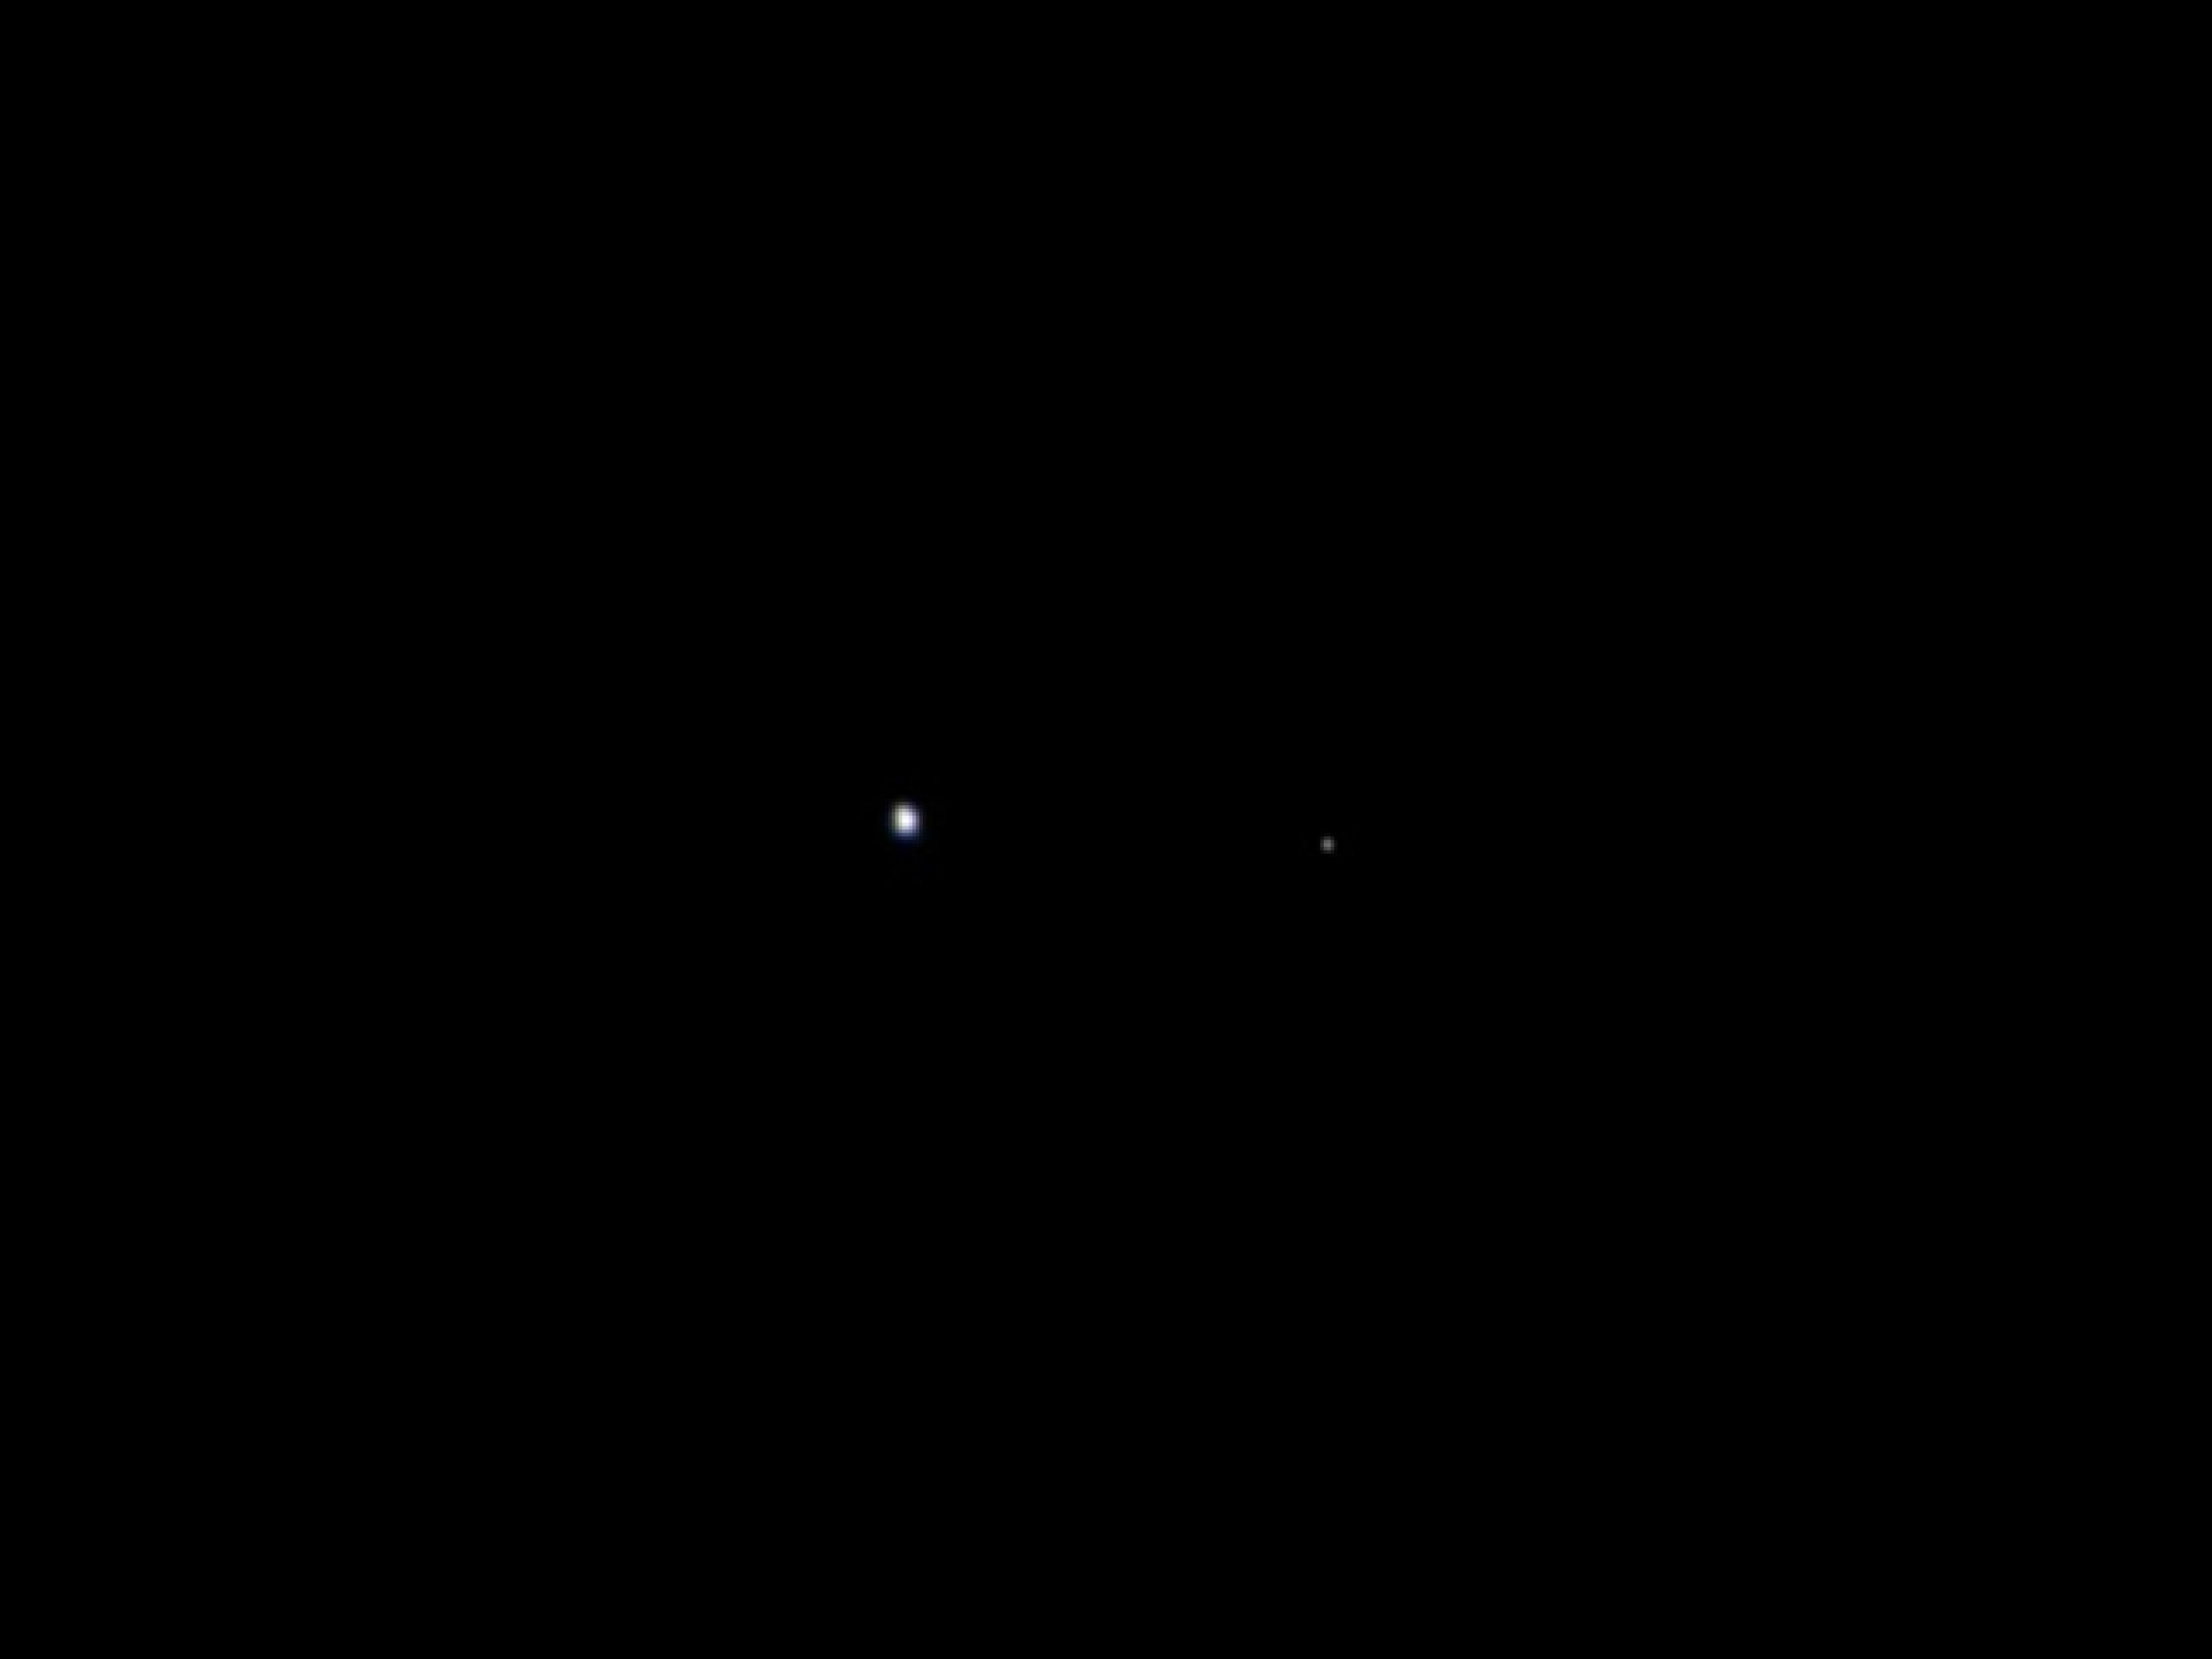 Rare Picture of Earth and Moon Captured by Jupiter-Bound Space Probe Juno